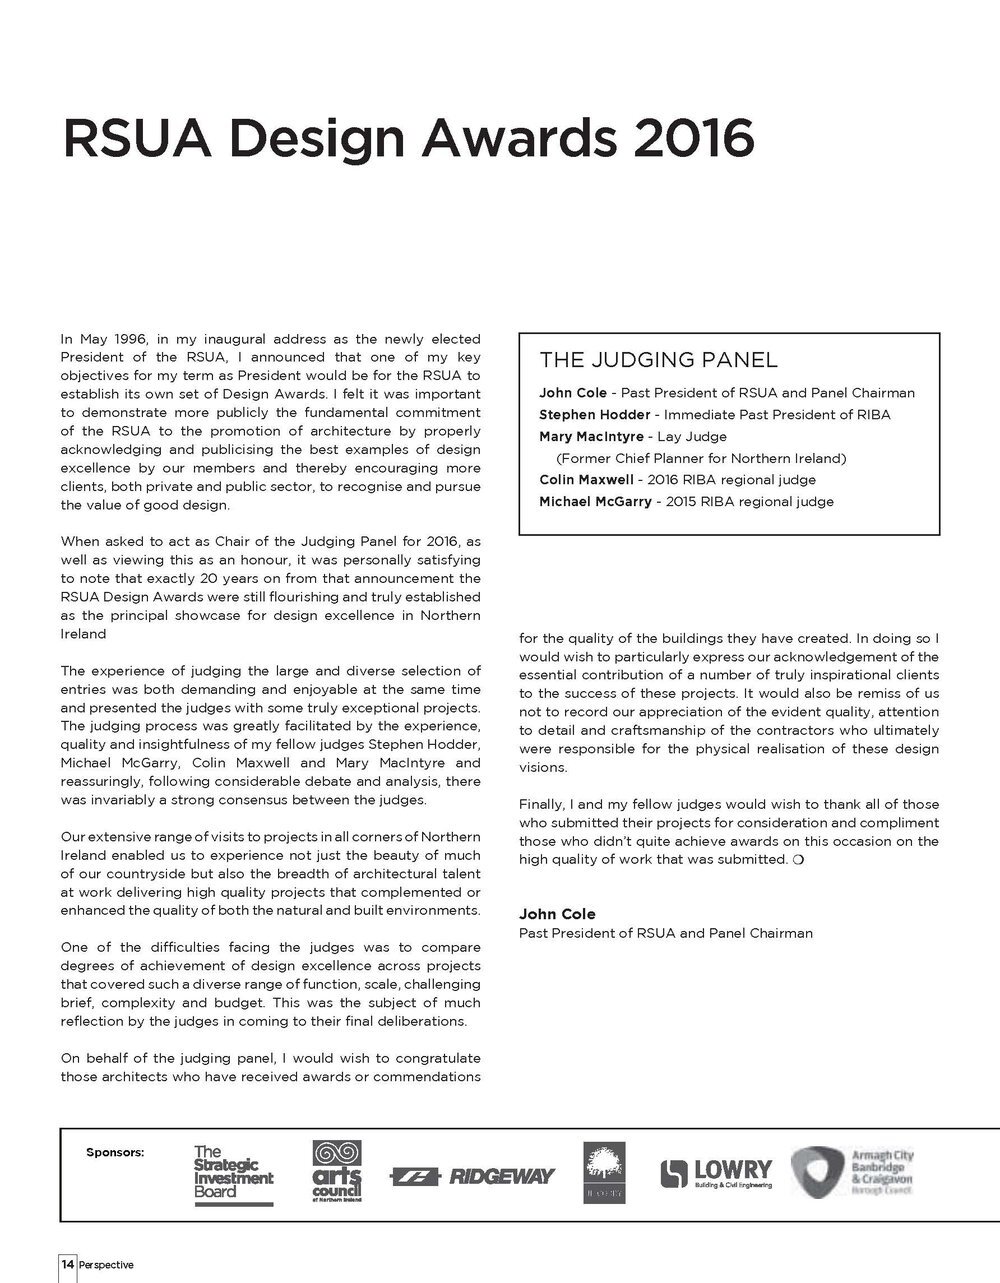 RSUA+Awards+Article+-+Perspective+Magazine_Page_2.jpg